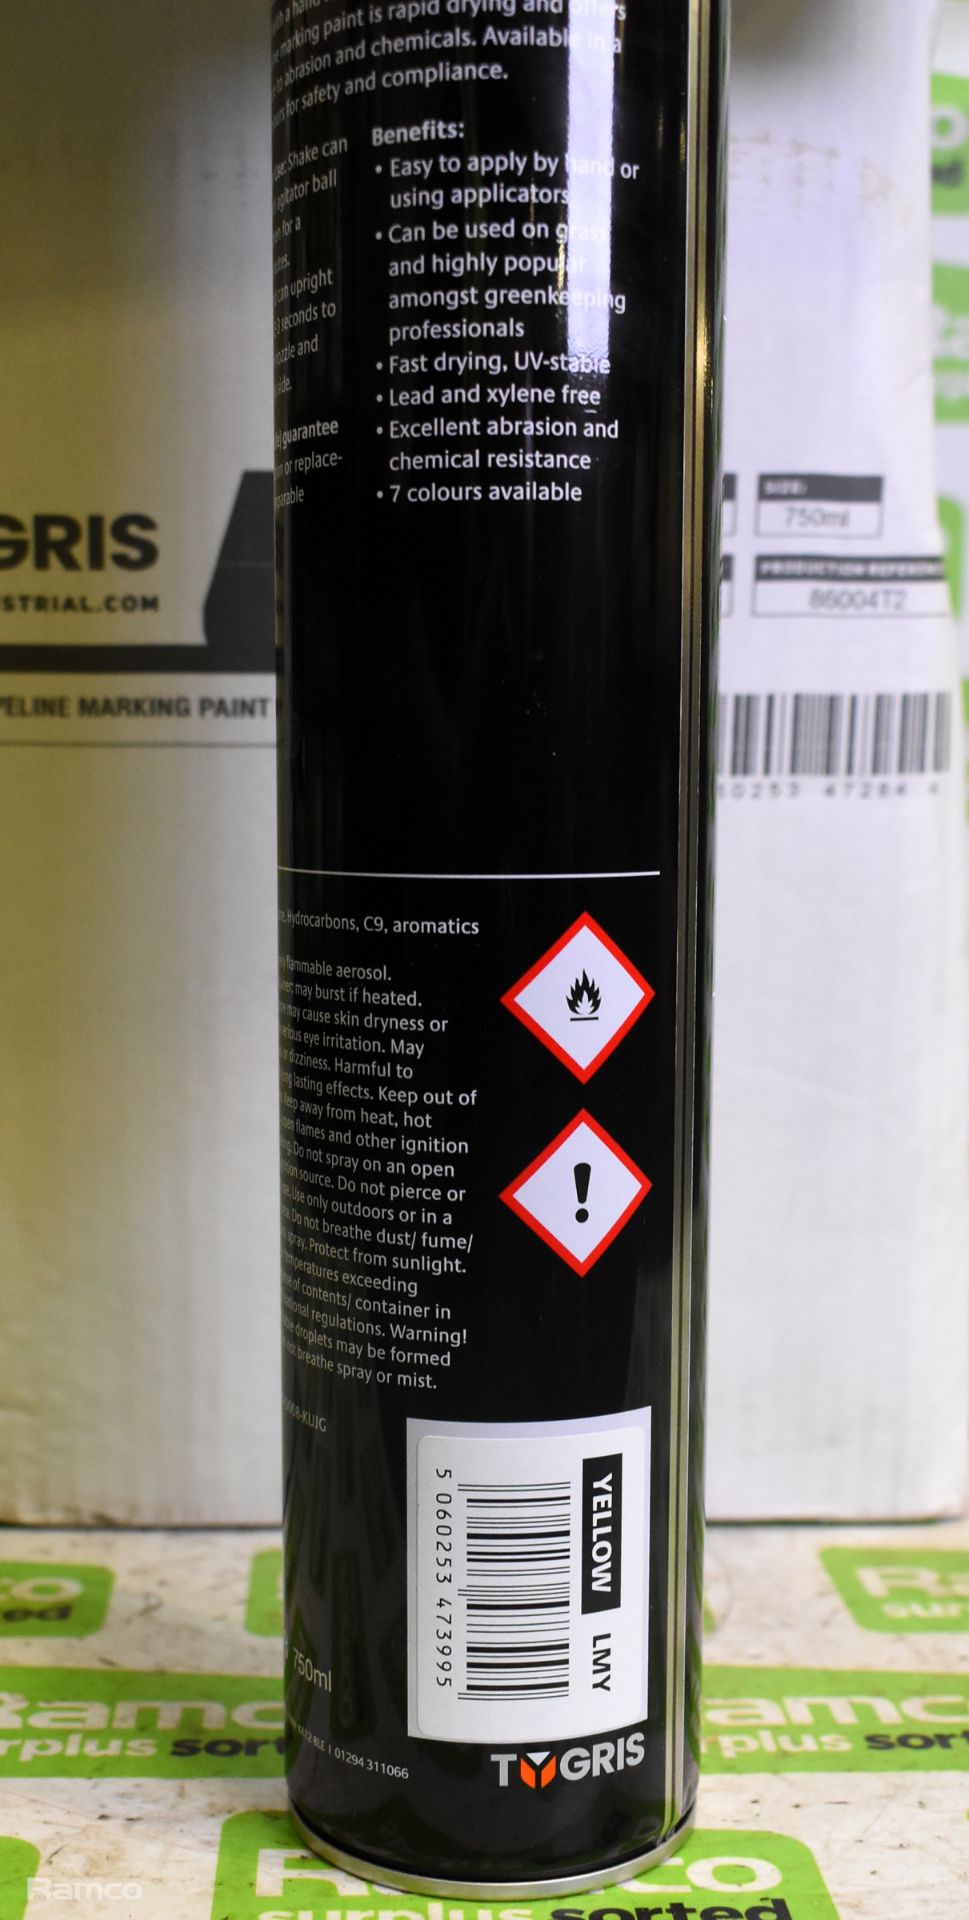 12x cans of Tygris stripe line marking paint - yellow 750ml - Image 2 of 3